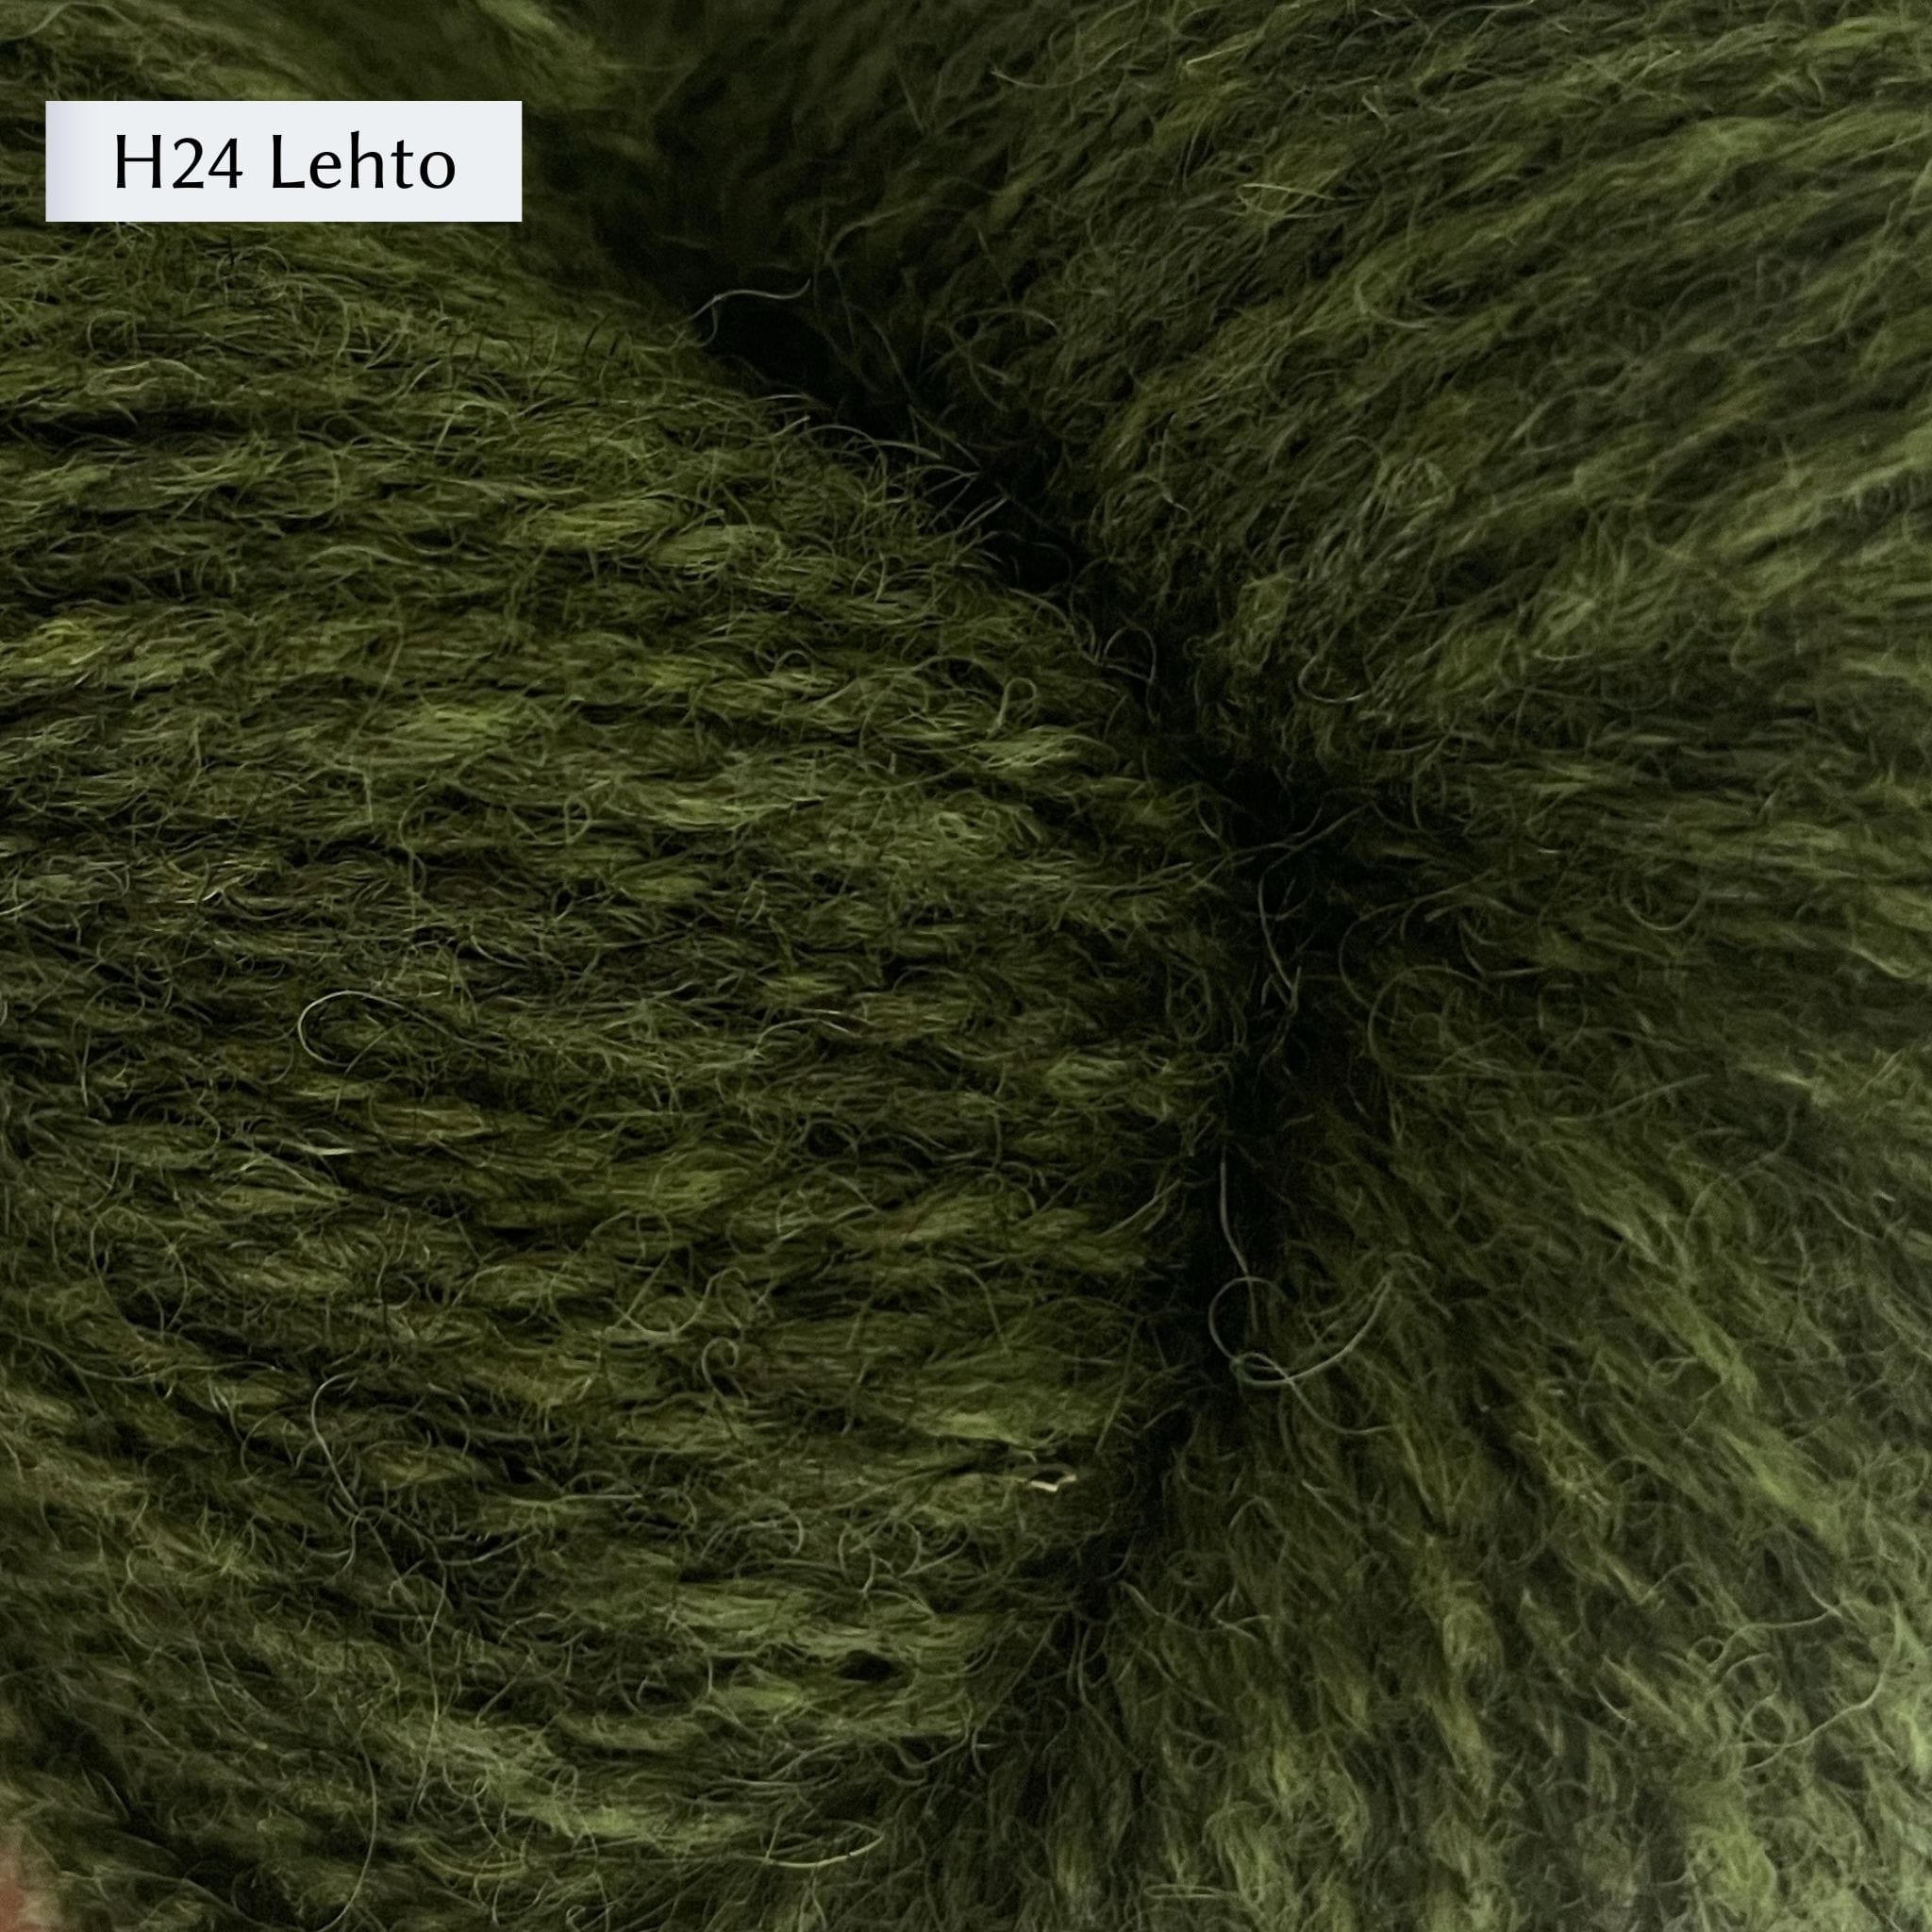 Tukuwool DK Yarn, 100% Finnish Wool shown in colorway H24 Lehto which is a heathered darker green color. 